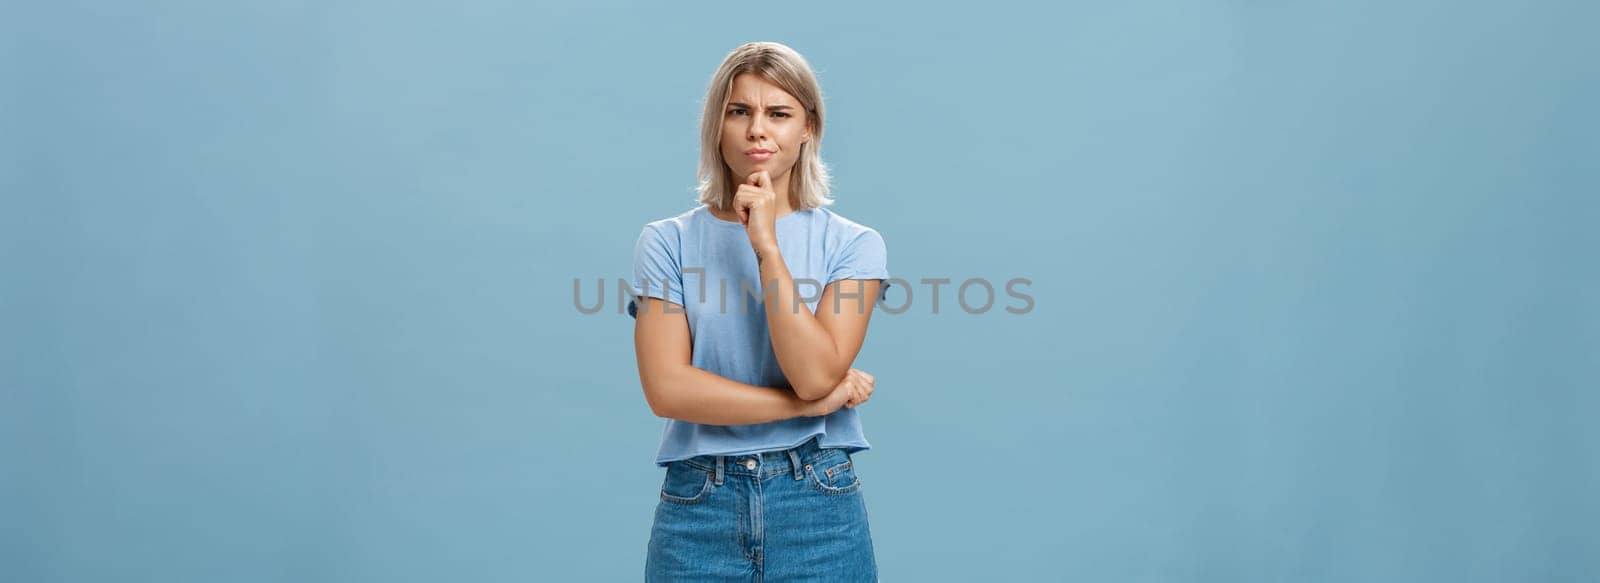 I doubt it good idea. Suspicious intense creative young female coworker in outdoor outfit frowning from doubtful thoughts holding hand on chin while thinking expressing disbelief over blue wall.